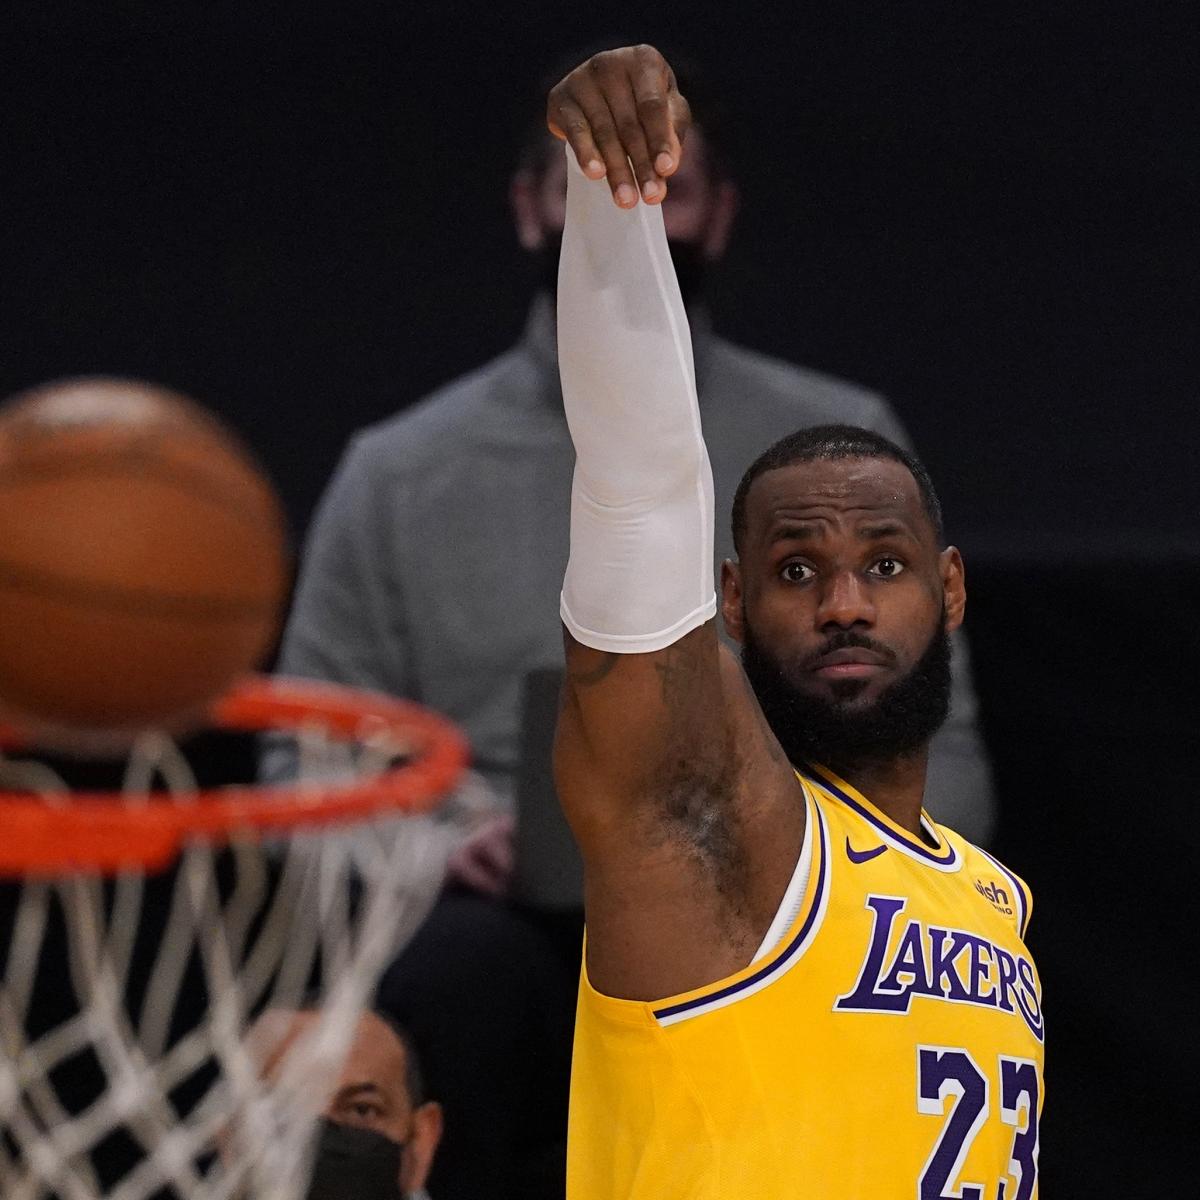 LeBron James Addresses Retirement During ESPYs Speech: 'That Day Is Not  Today' - Sports Illustrated